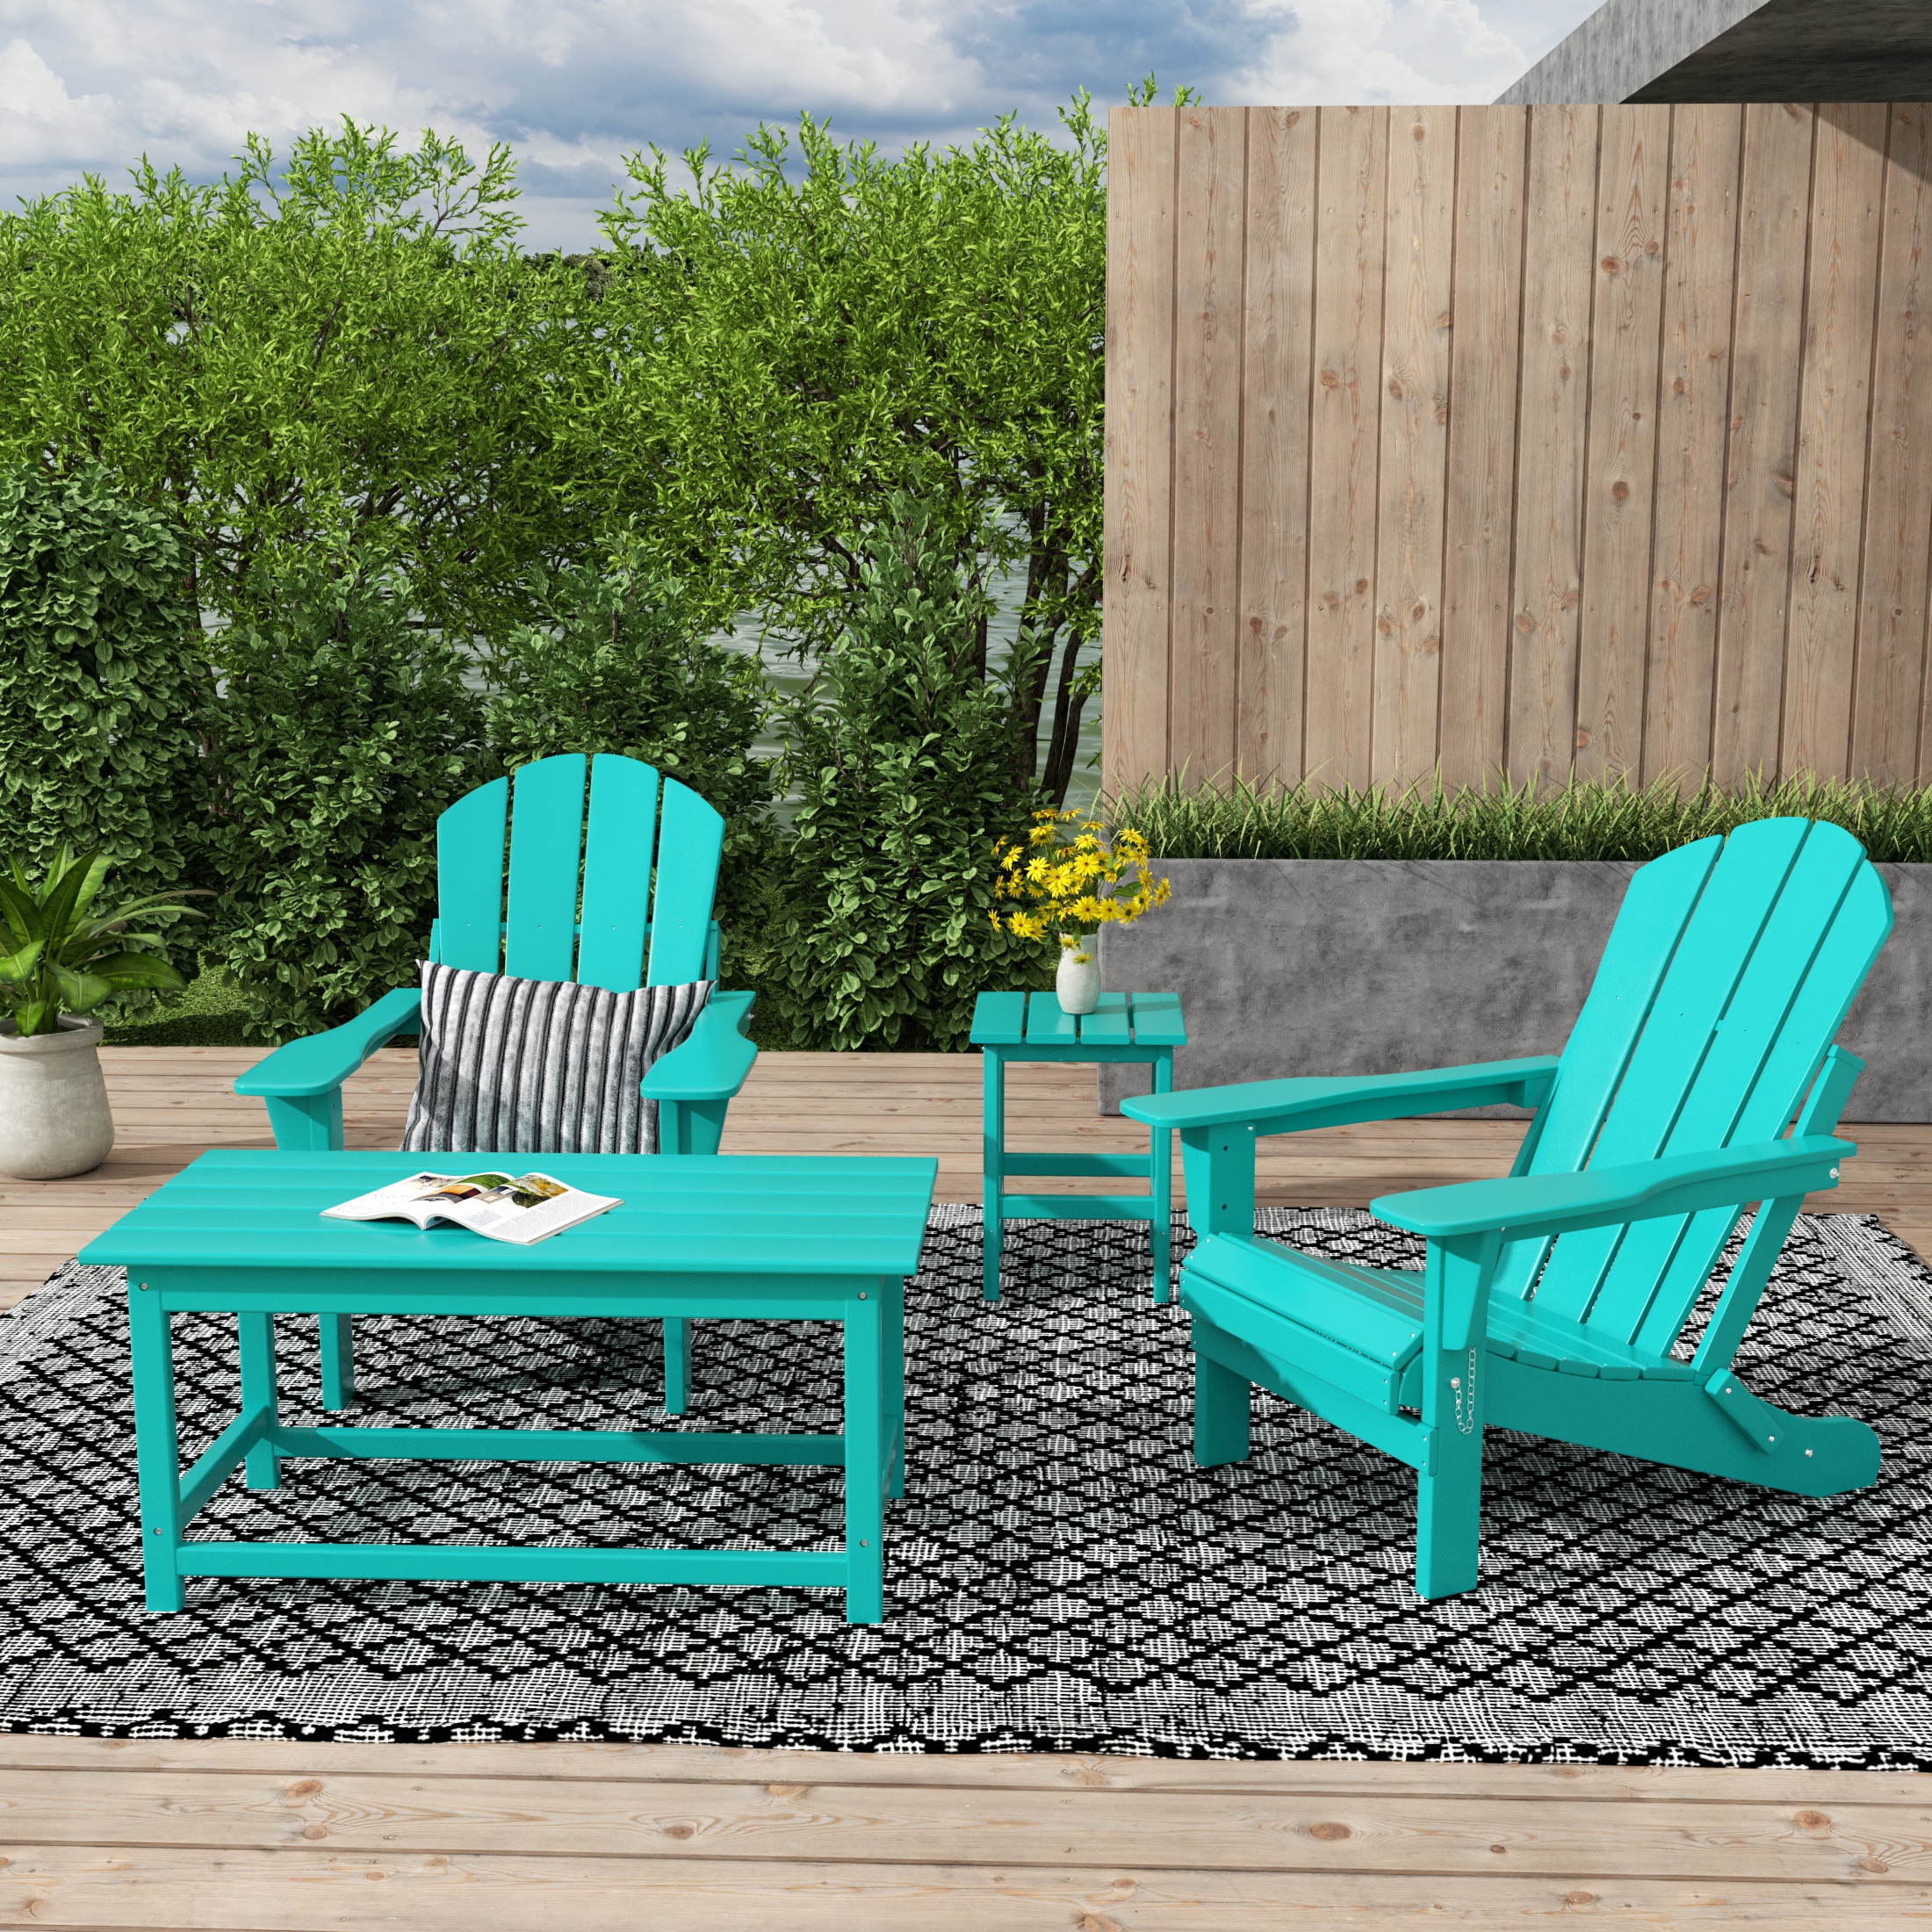 WestinTrends Malibu 4-Pieces Outdoor Patio Furniture Set, All Weather Outdoor Seating Plastic Adirondack Chair Set of 2 with Coffee Table and Side Table, Turquoise - image 2 of 7